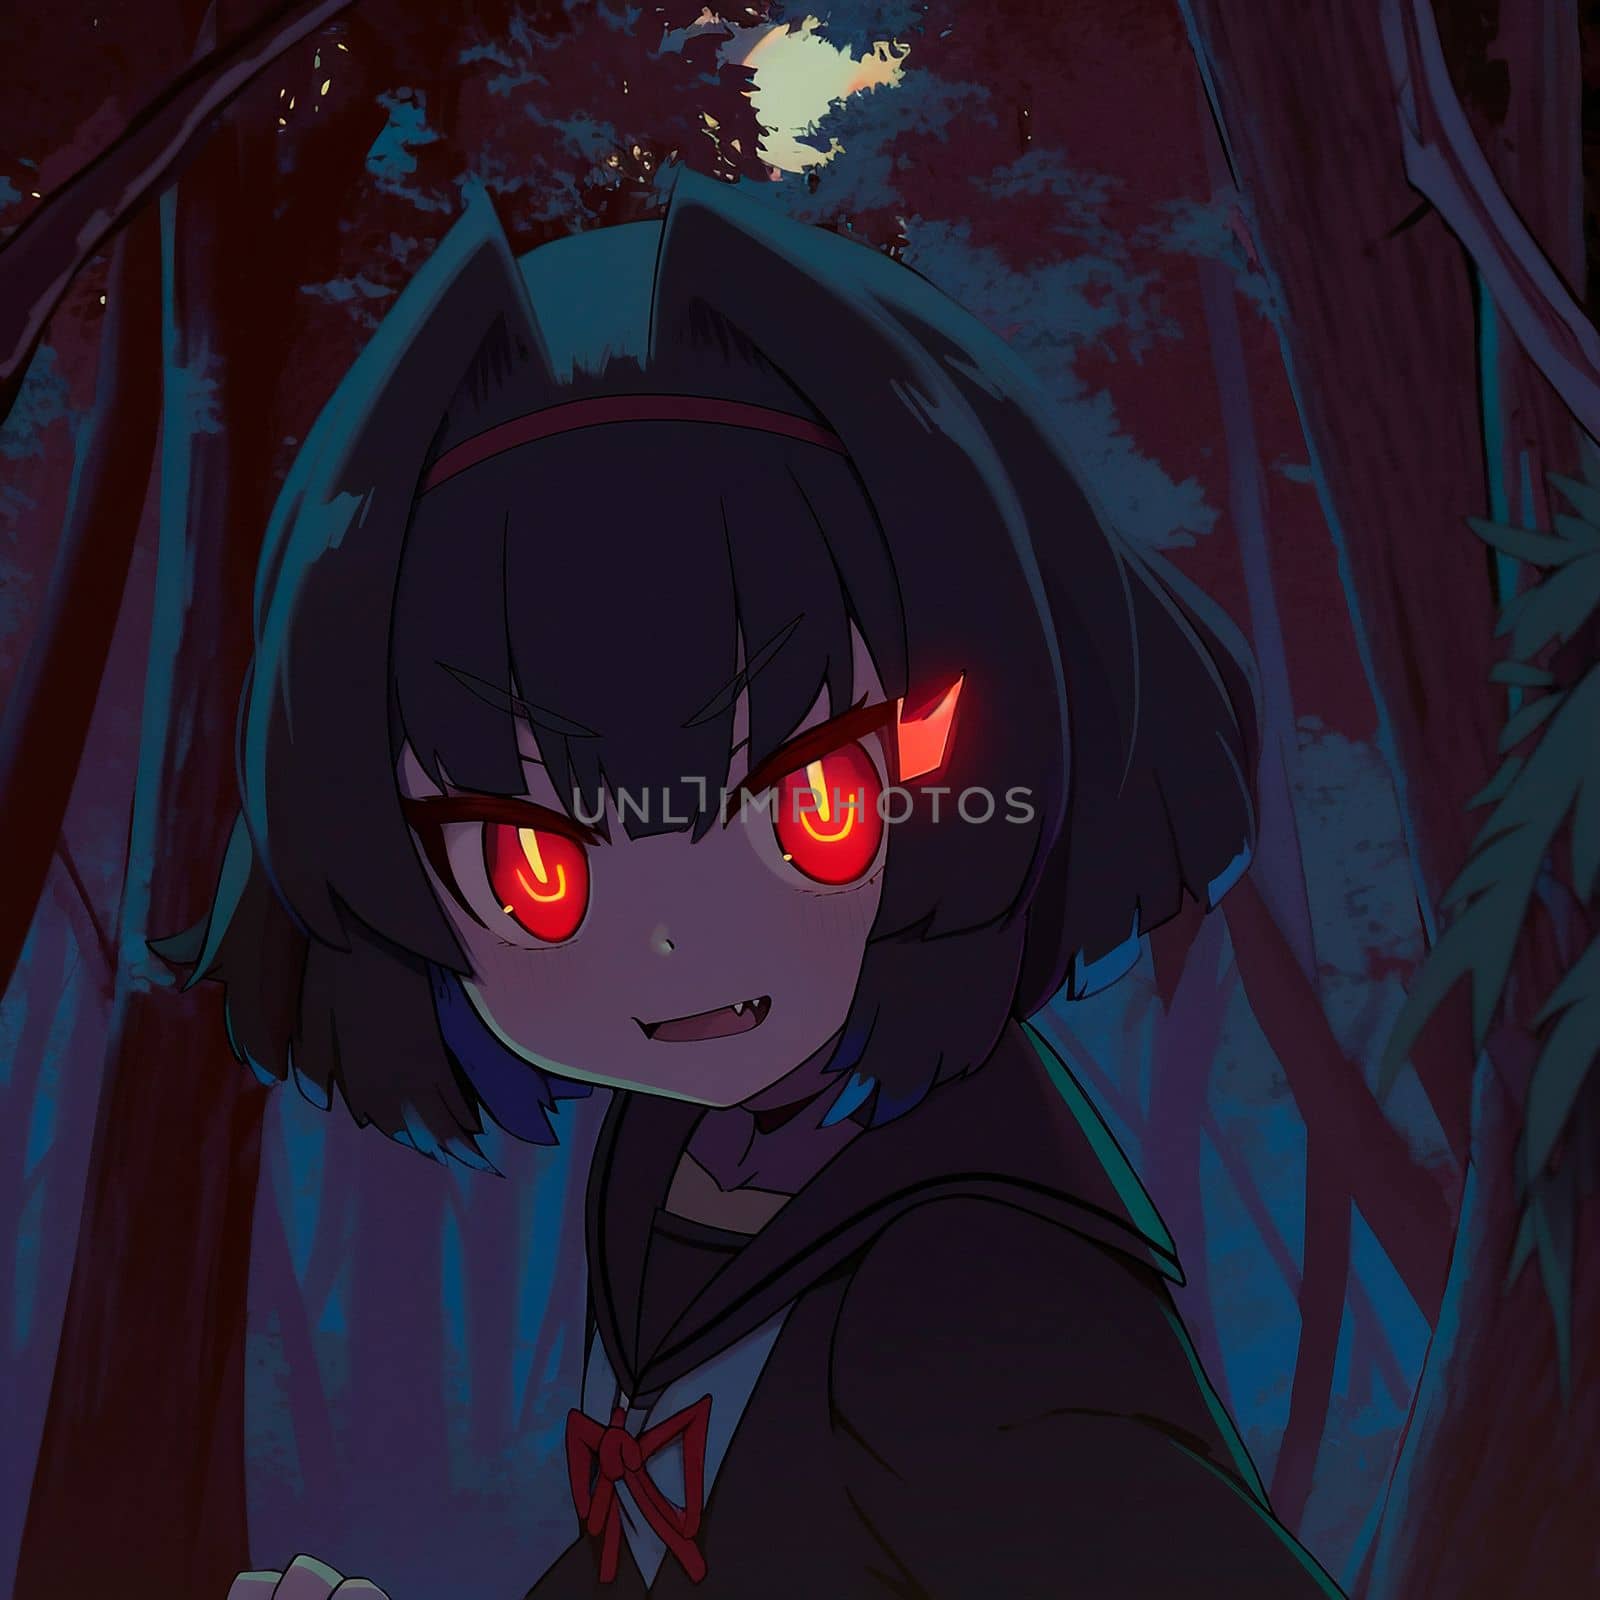 Girl with red eyes in anime style  by NeuroSky